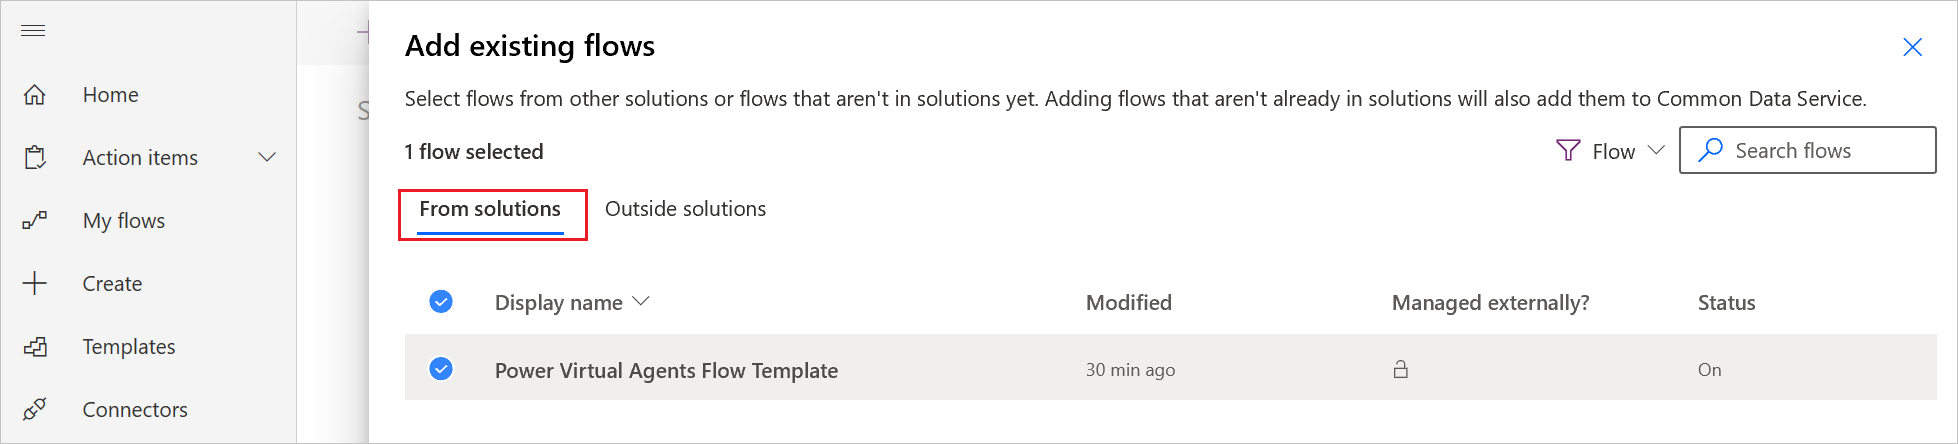 Screenshot of the list existing flows in solutions.